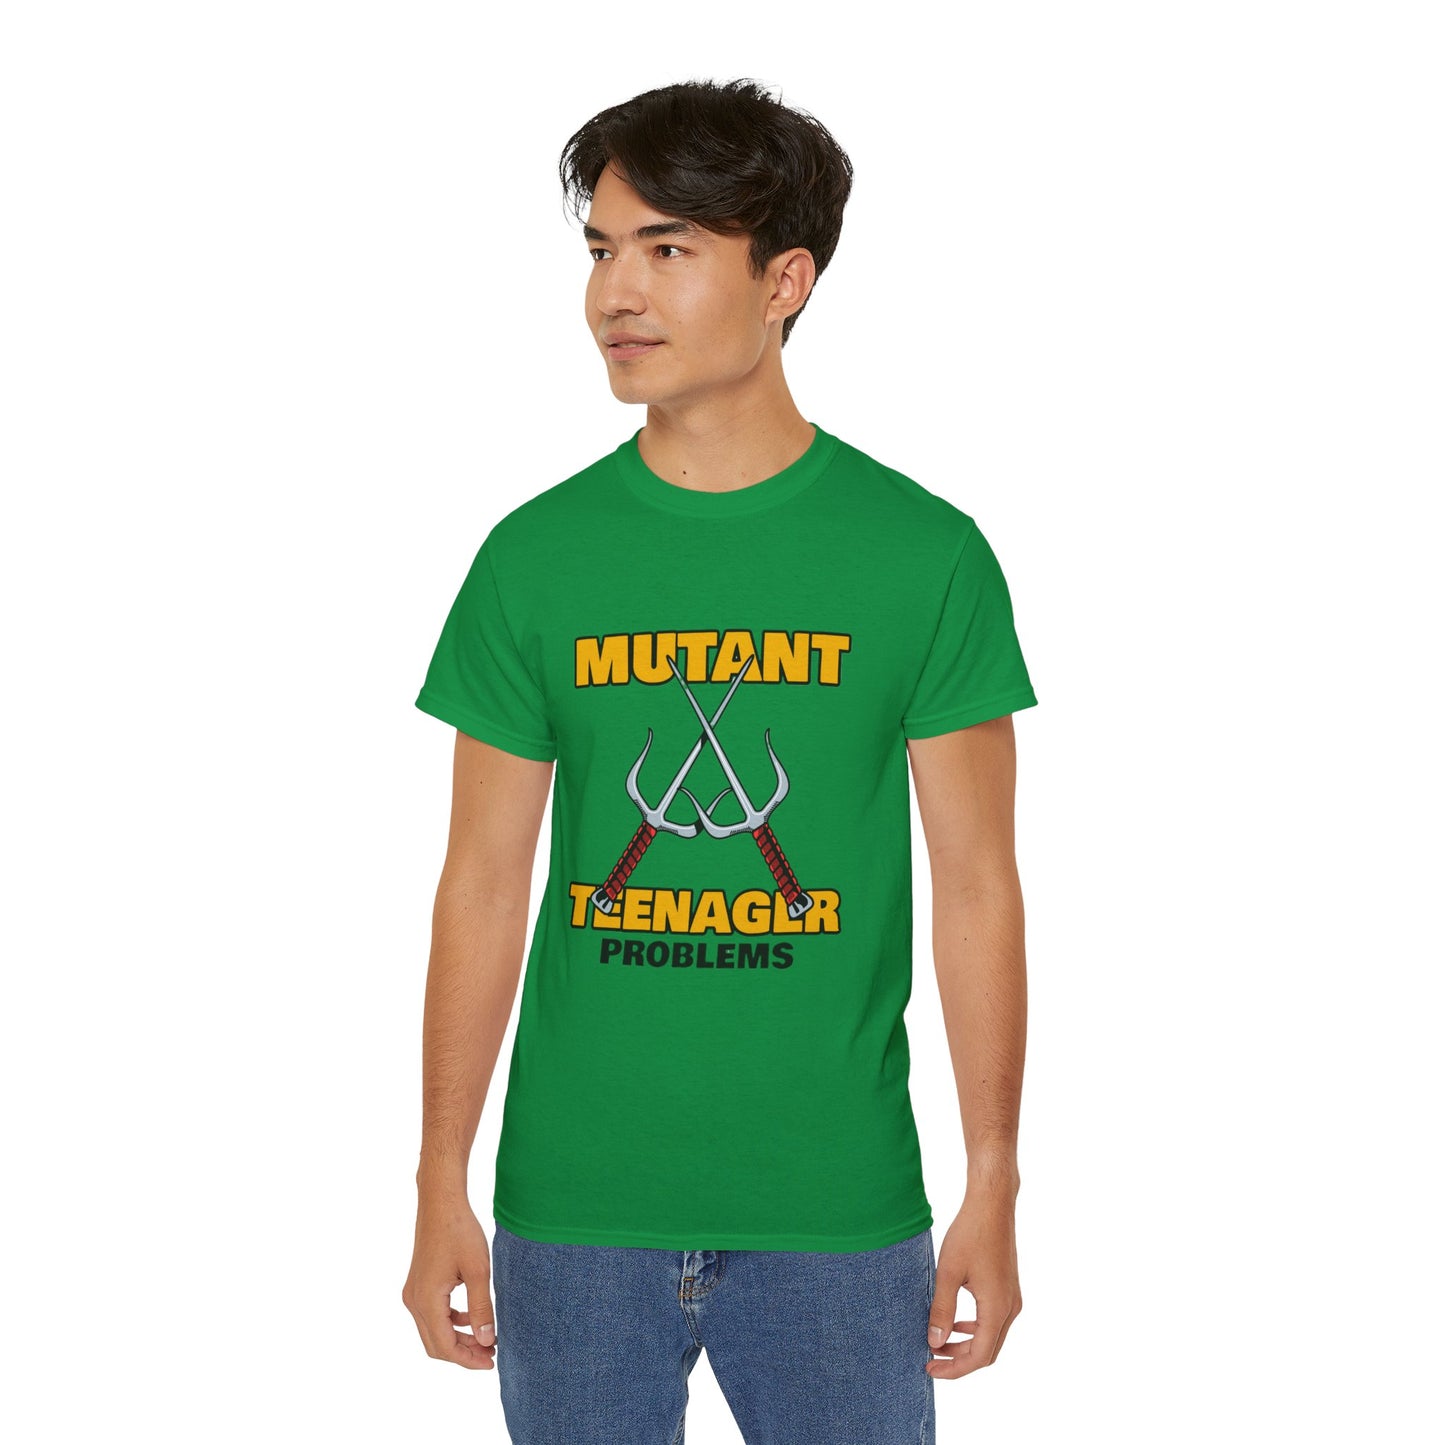 Mutant Teenager Problems Turtle Inspired Ultra Cotton Tee